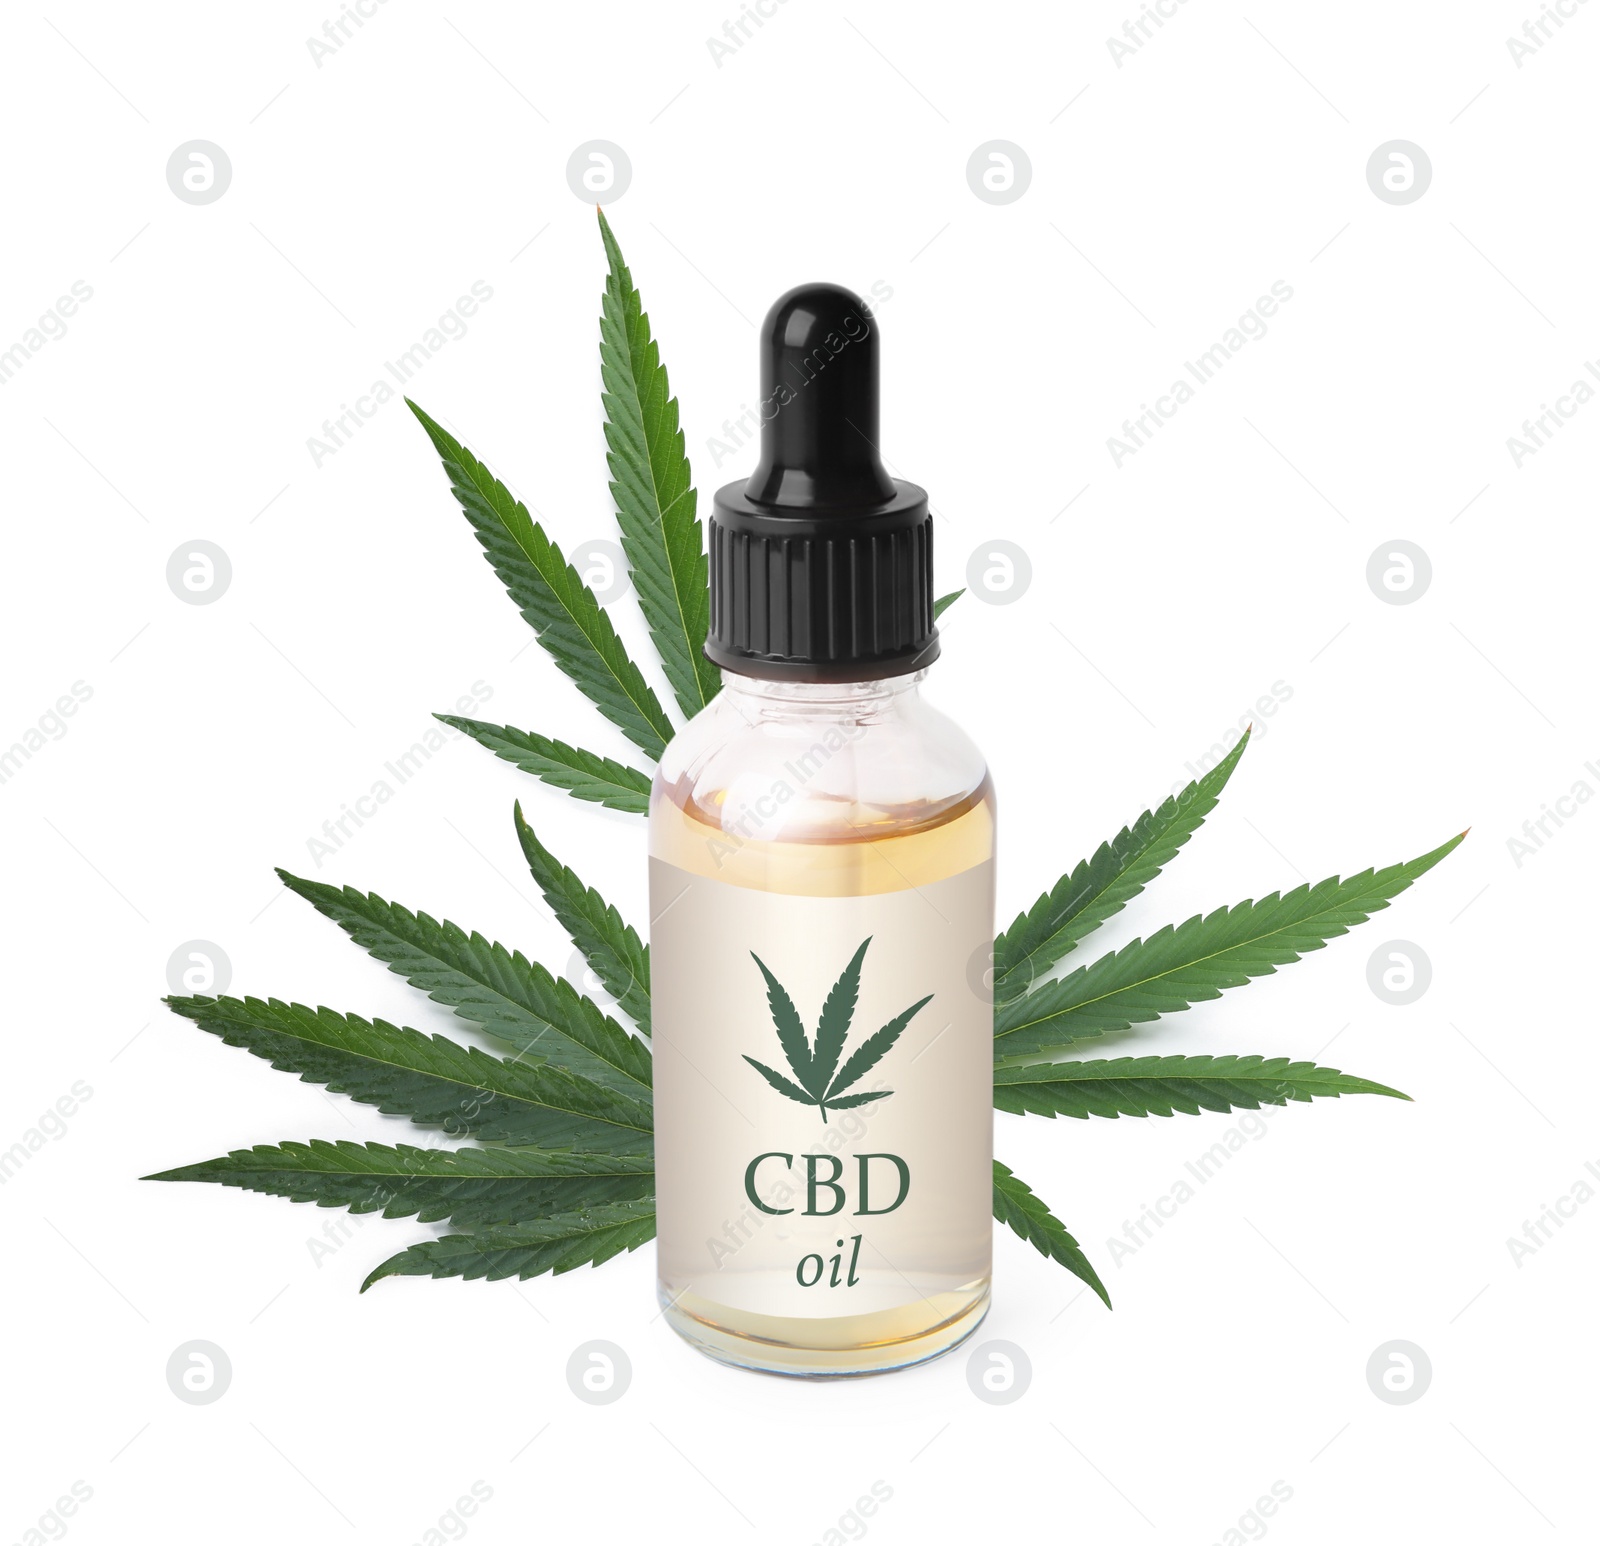 Image of Bottle of cannabidiol tincture and hemp leaves on white background